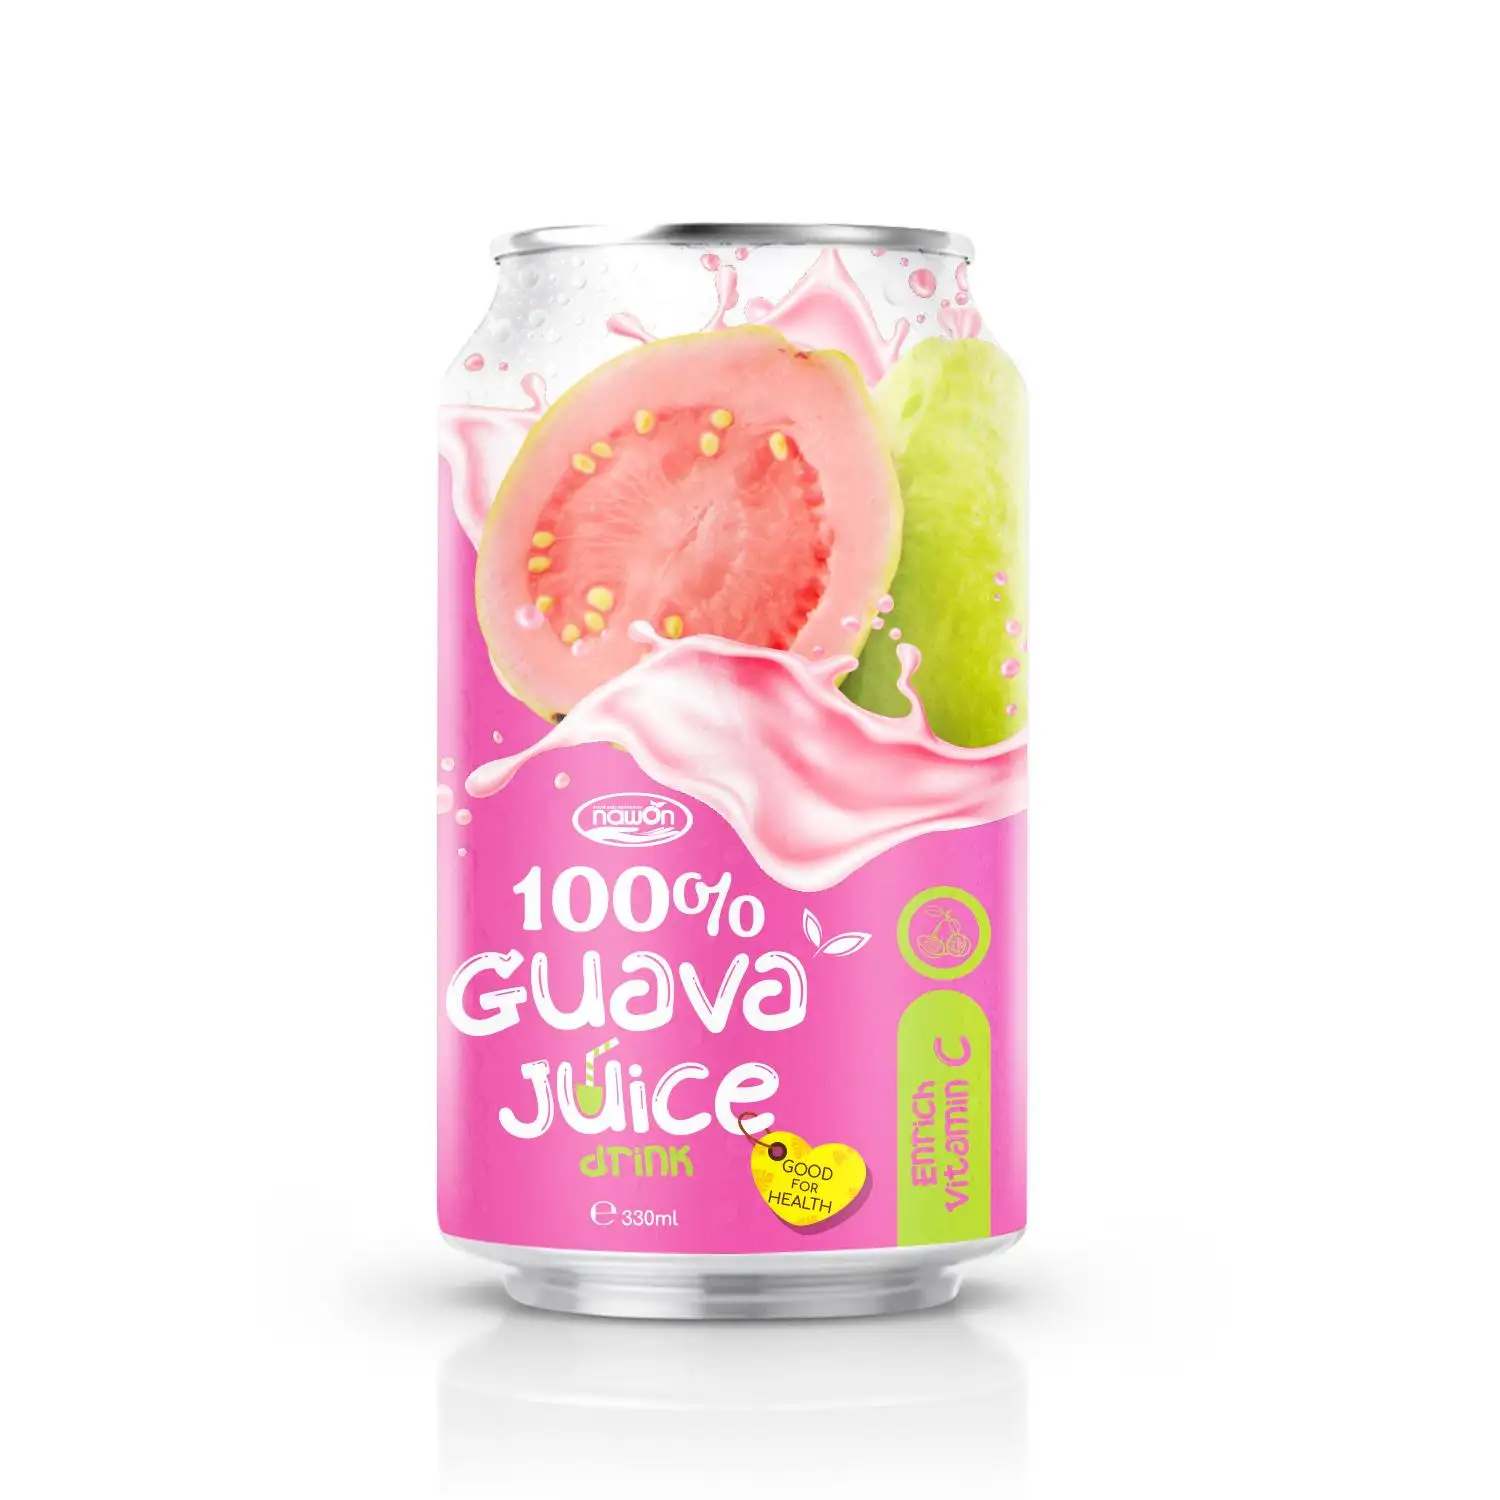 All Natural Ingredients Fruit Juice Drink 100% - Premium Quality Product Best Seller Pink Guava Juice